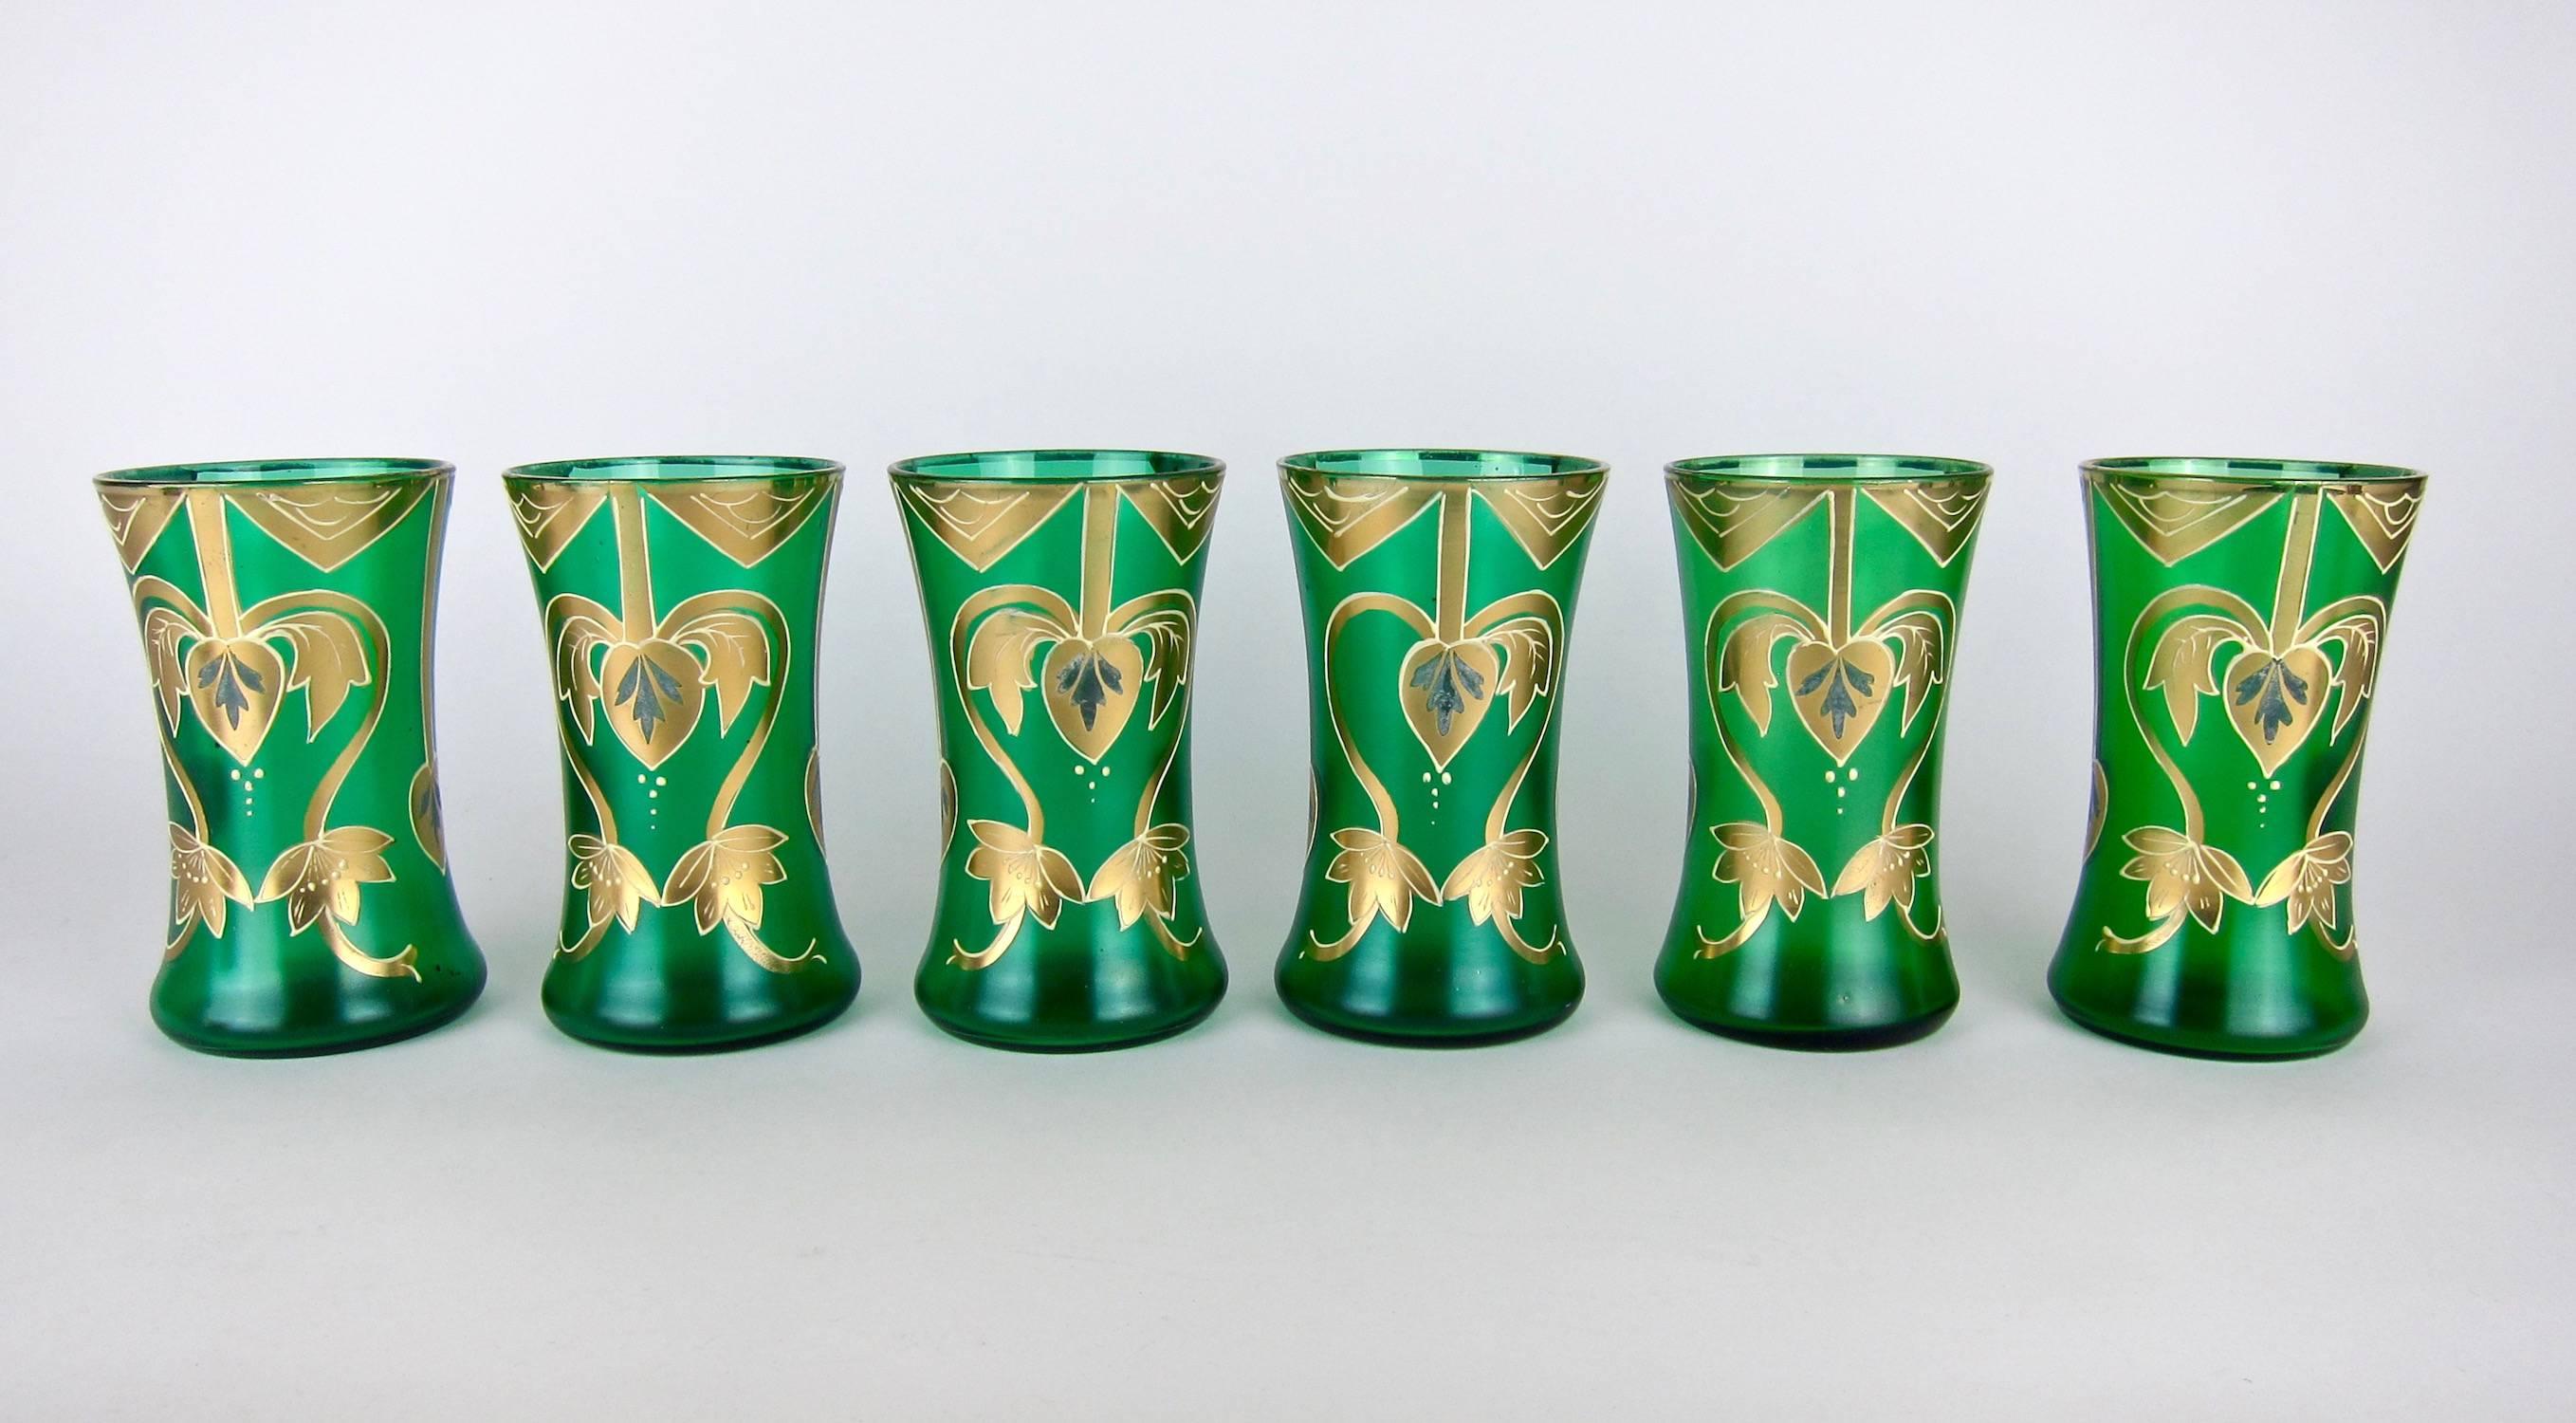 Antique set of six drinking glasses in emerald green satin glass. Each glass is decorated with a gilt rim and raised, hand-painted enamel in the Art Nouveau / Jugendstil style. The glasses are unmarked, but were made in Bohemia, an area encompassing